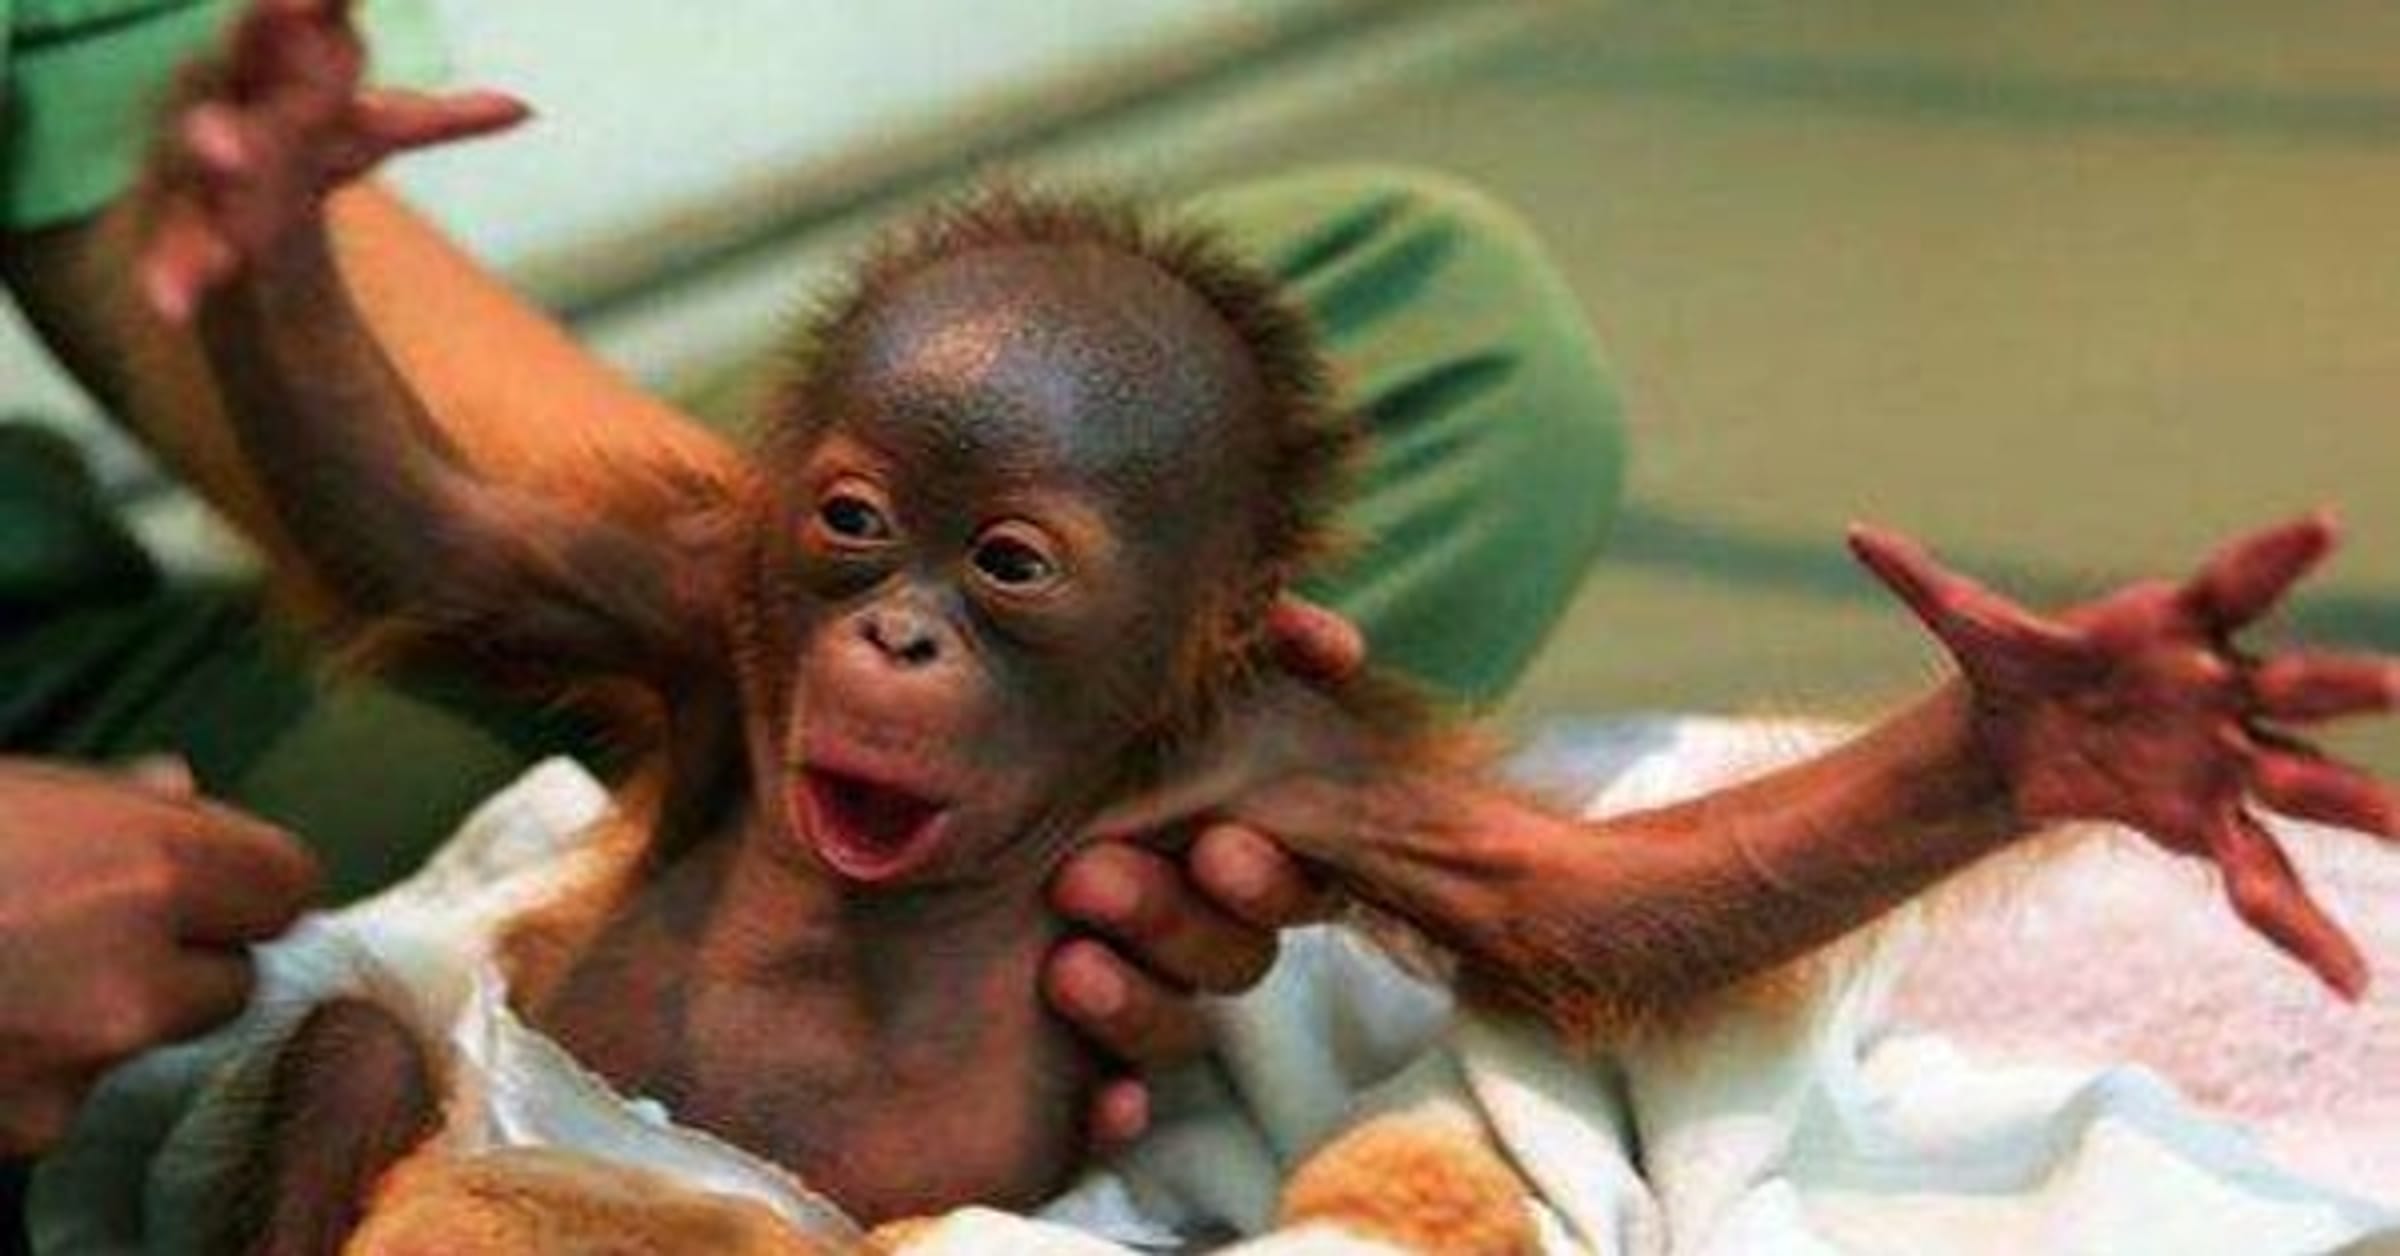 cutest baby monkey in the world